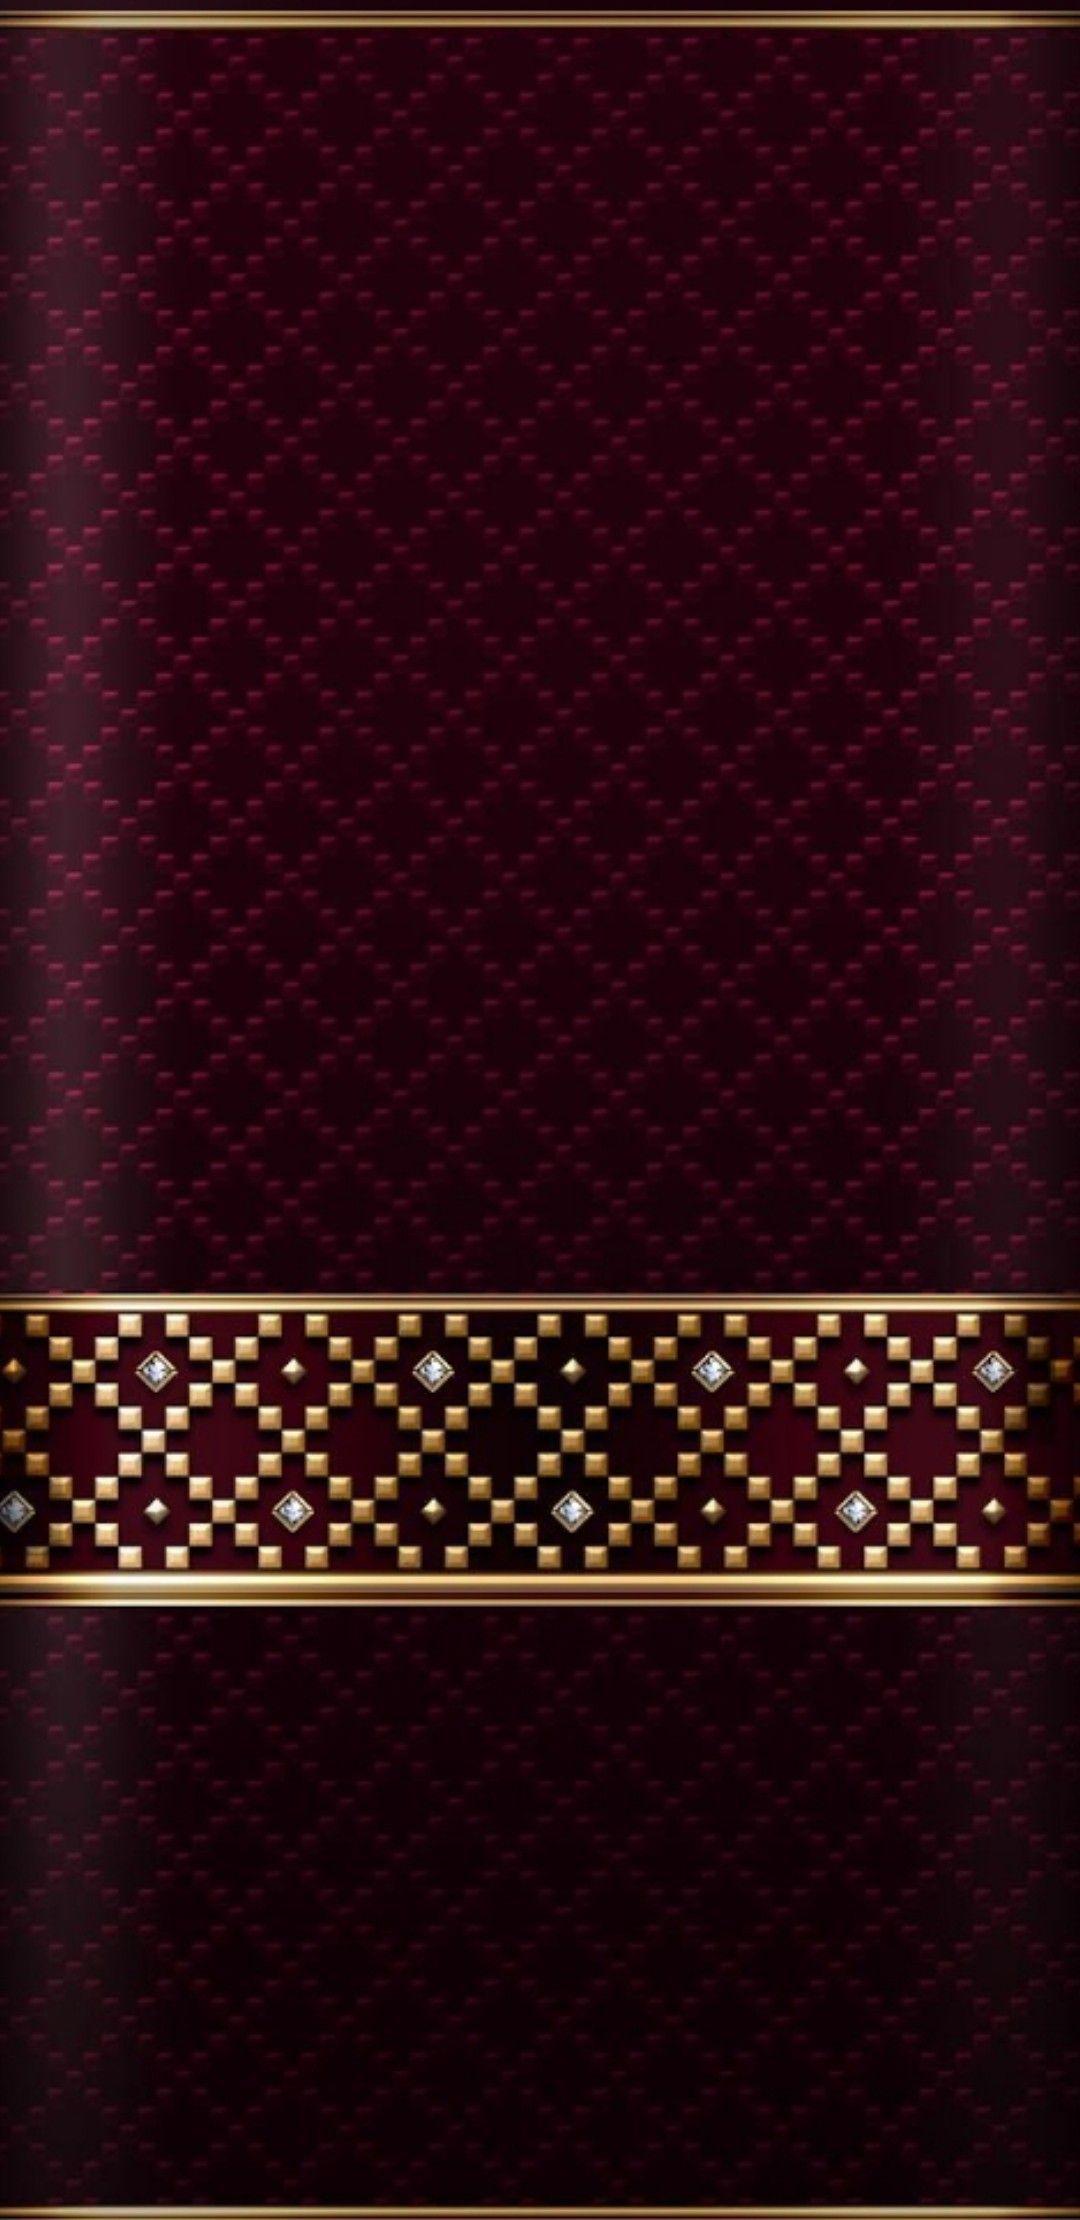 Burgundy and Gold Wallpapers - Top Free Burgundy and Gold Backgrounds